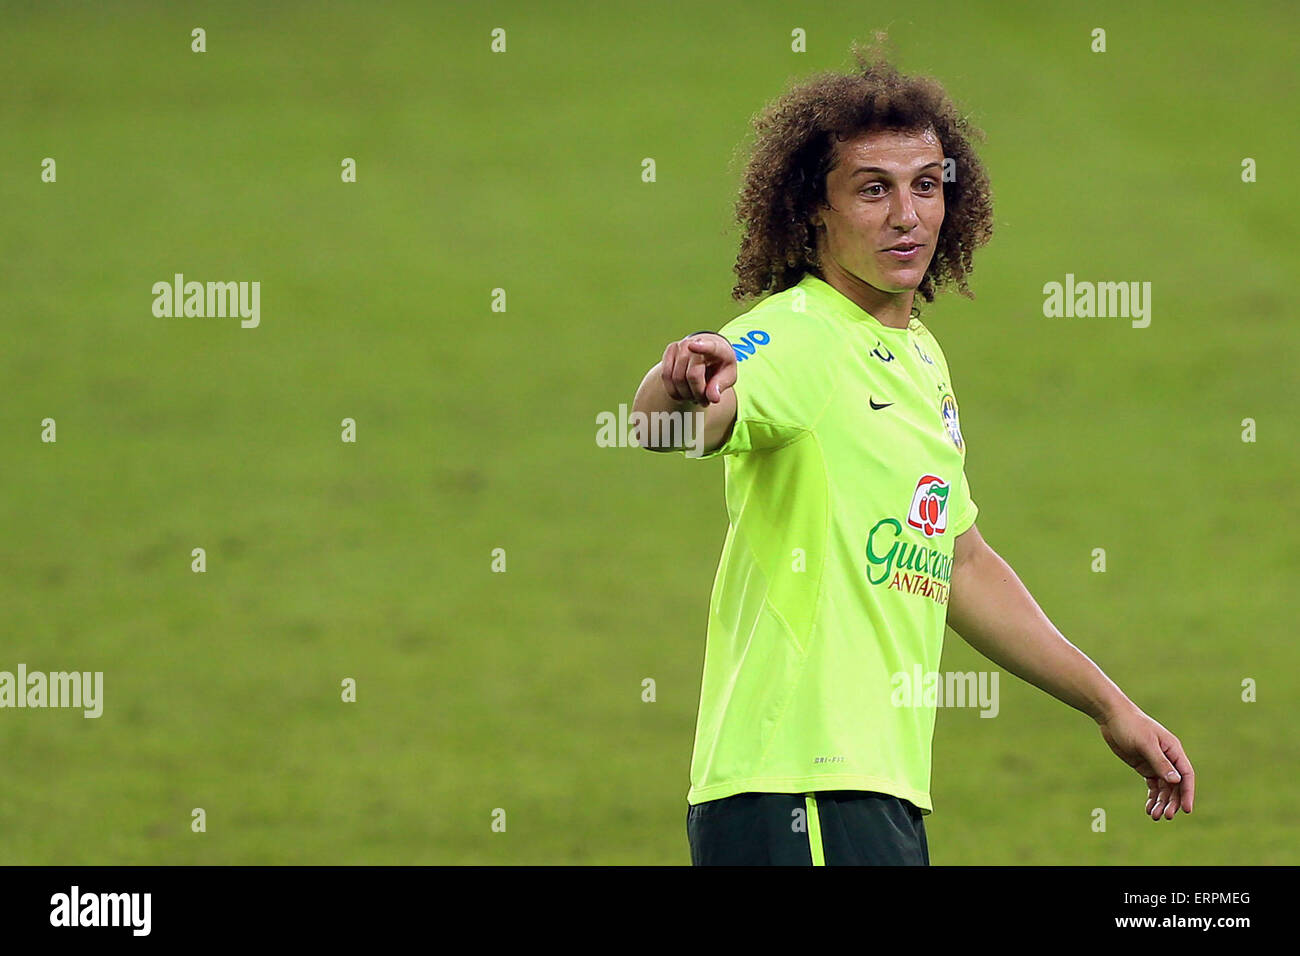 Sao Paulo, Brazil. 6th June, 2015. Player David Luiz of Brazil's national soccer team takes part a training session in Sao Paulo, Brazil, on June 6, 2015. Brazil will face Mexico in a friendly match on Sunday, before their participation in the Copa America 2015 finals, to be held in Chile from June 11 to July 4. © Rahel Patrasso/Xinhua/Alamy Live News Stock Photo